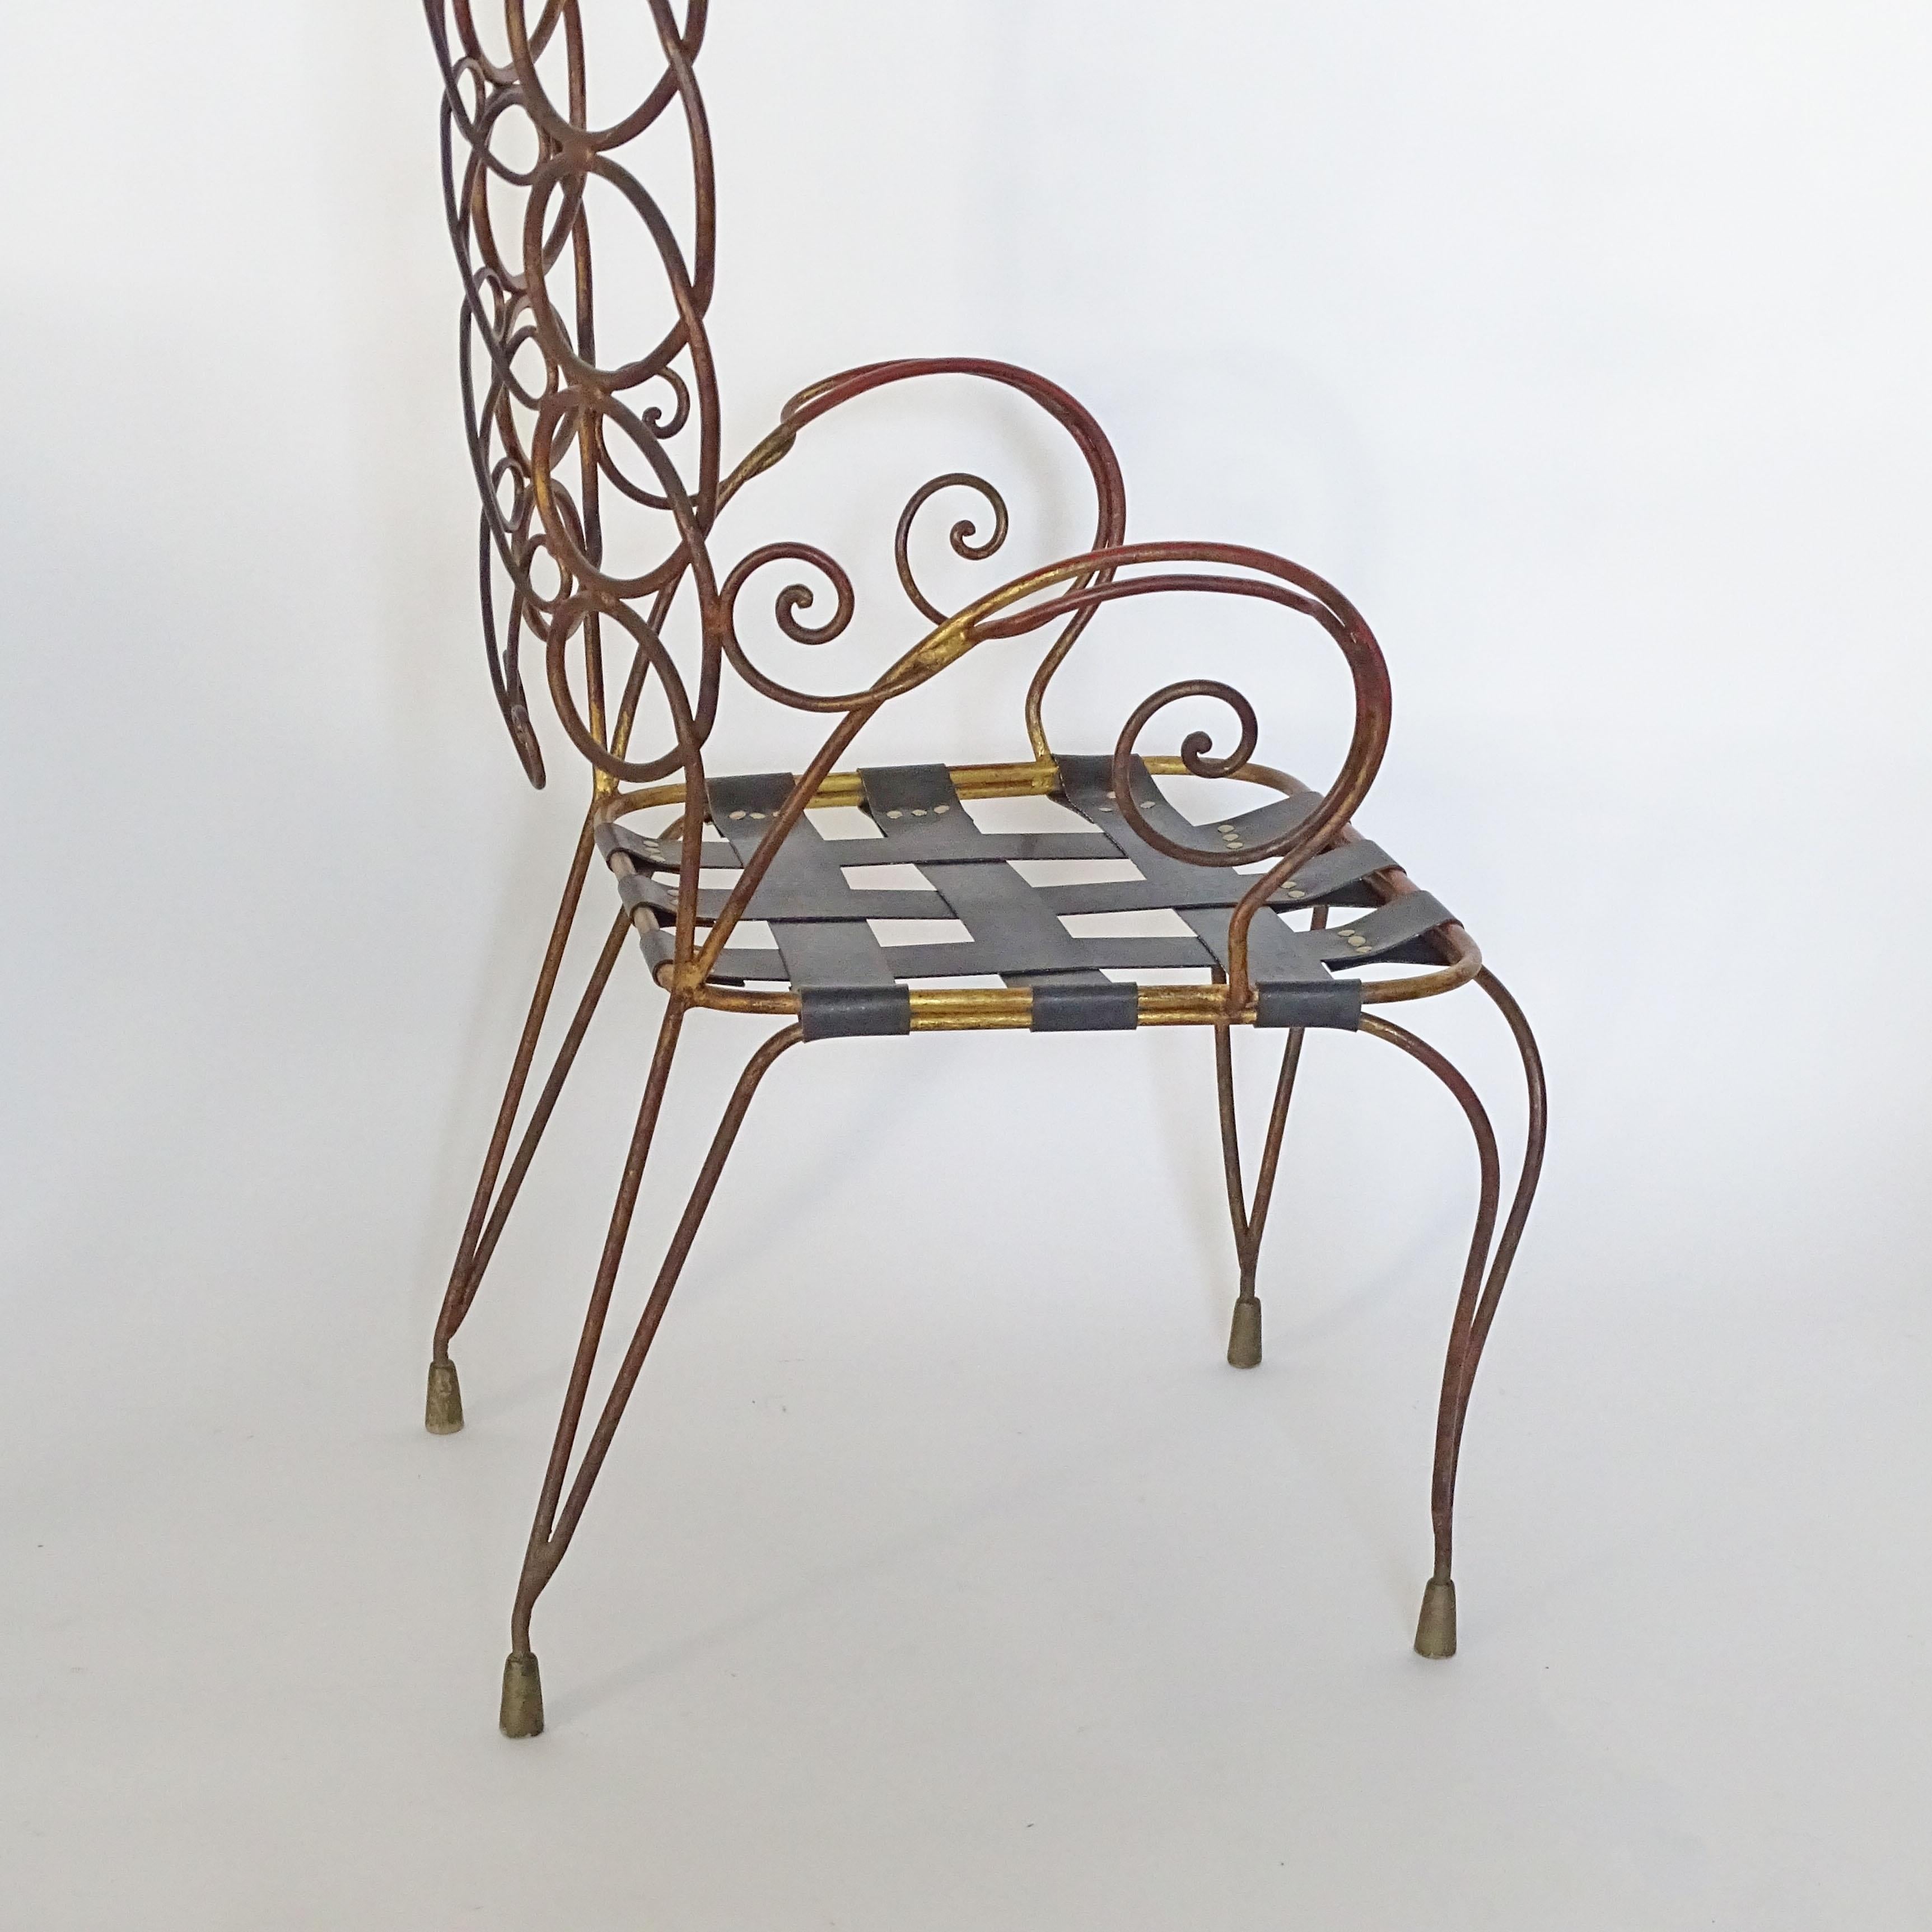 Gio Ponti Set of Four Painted and Gilded Iron Armchairs, 1948 For Sale 3